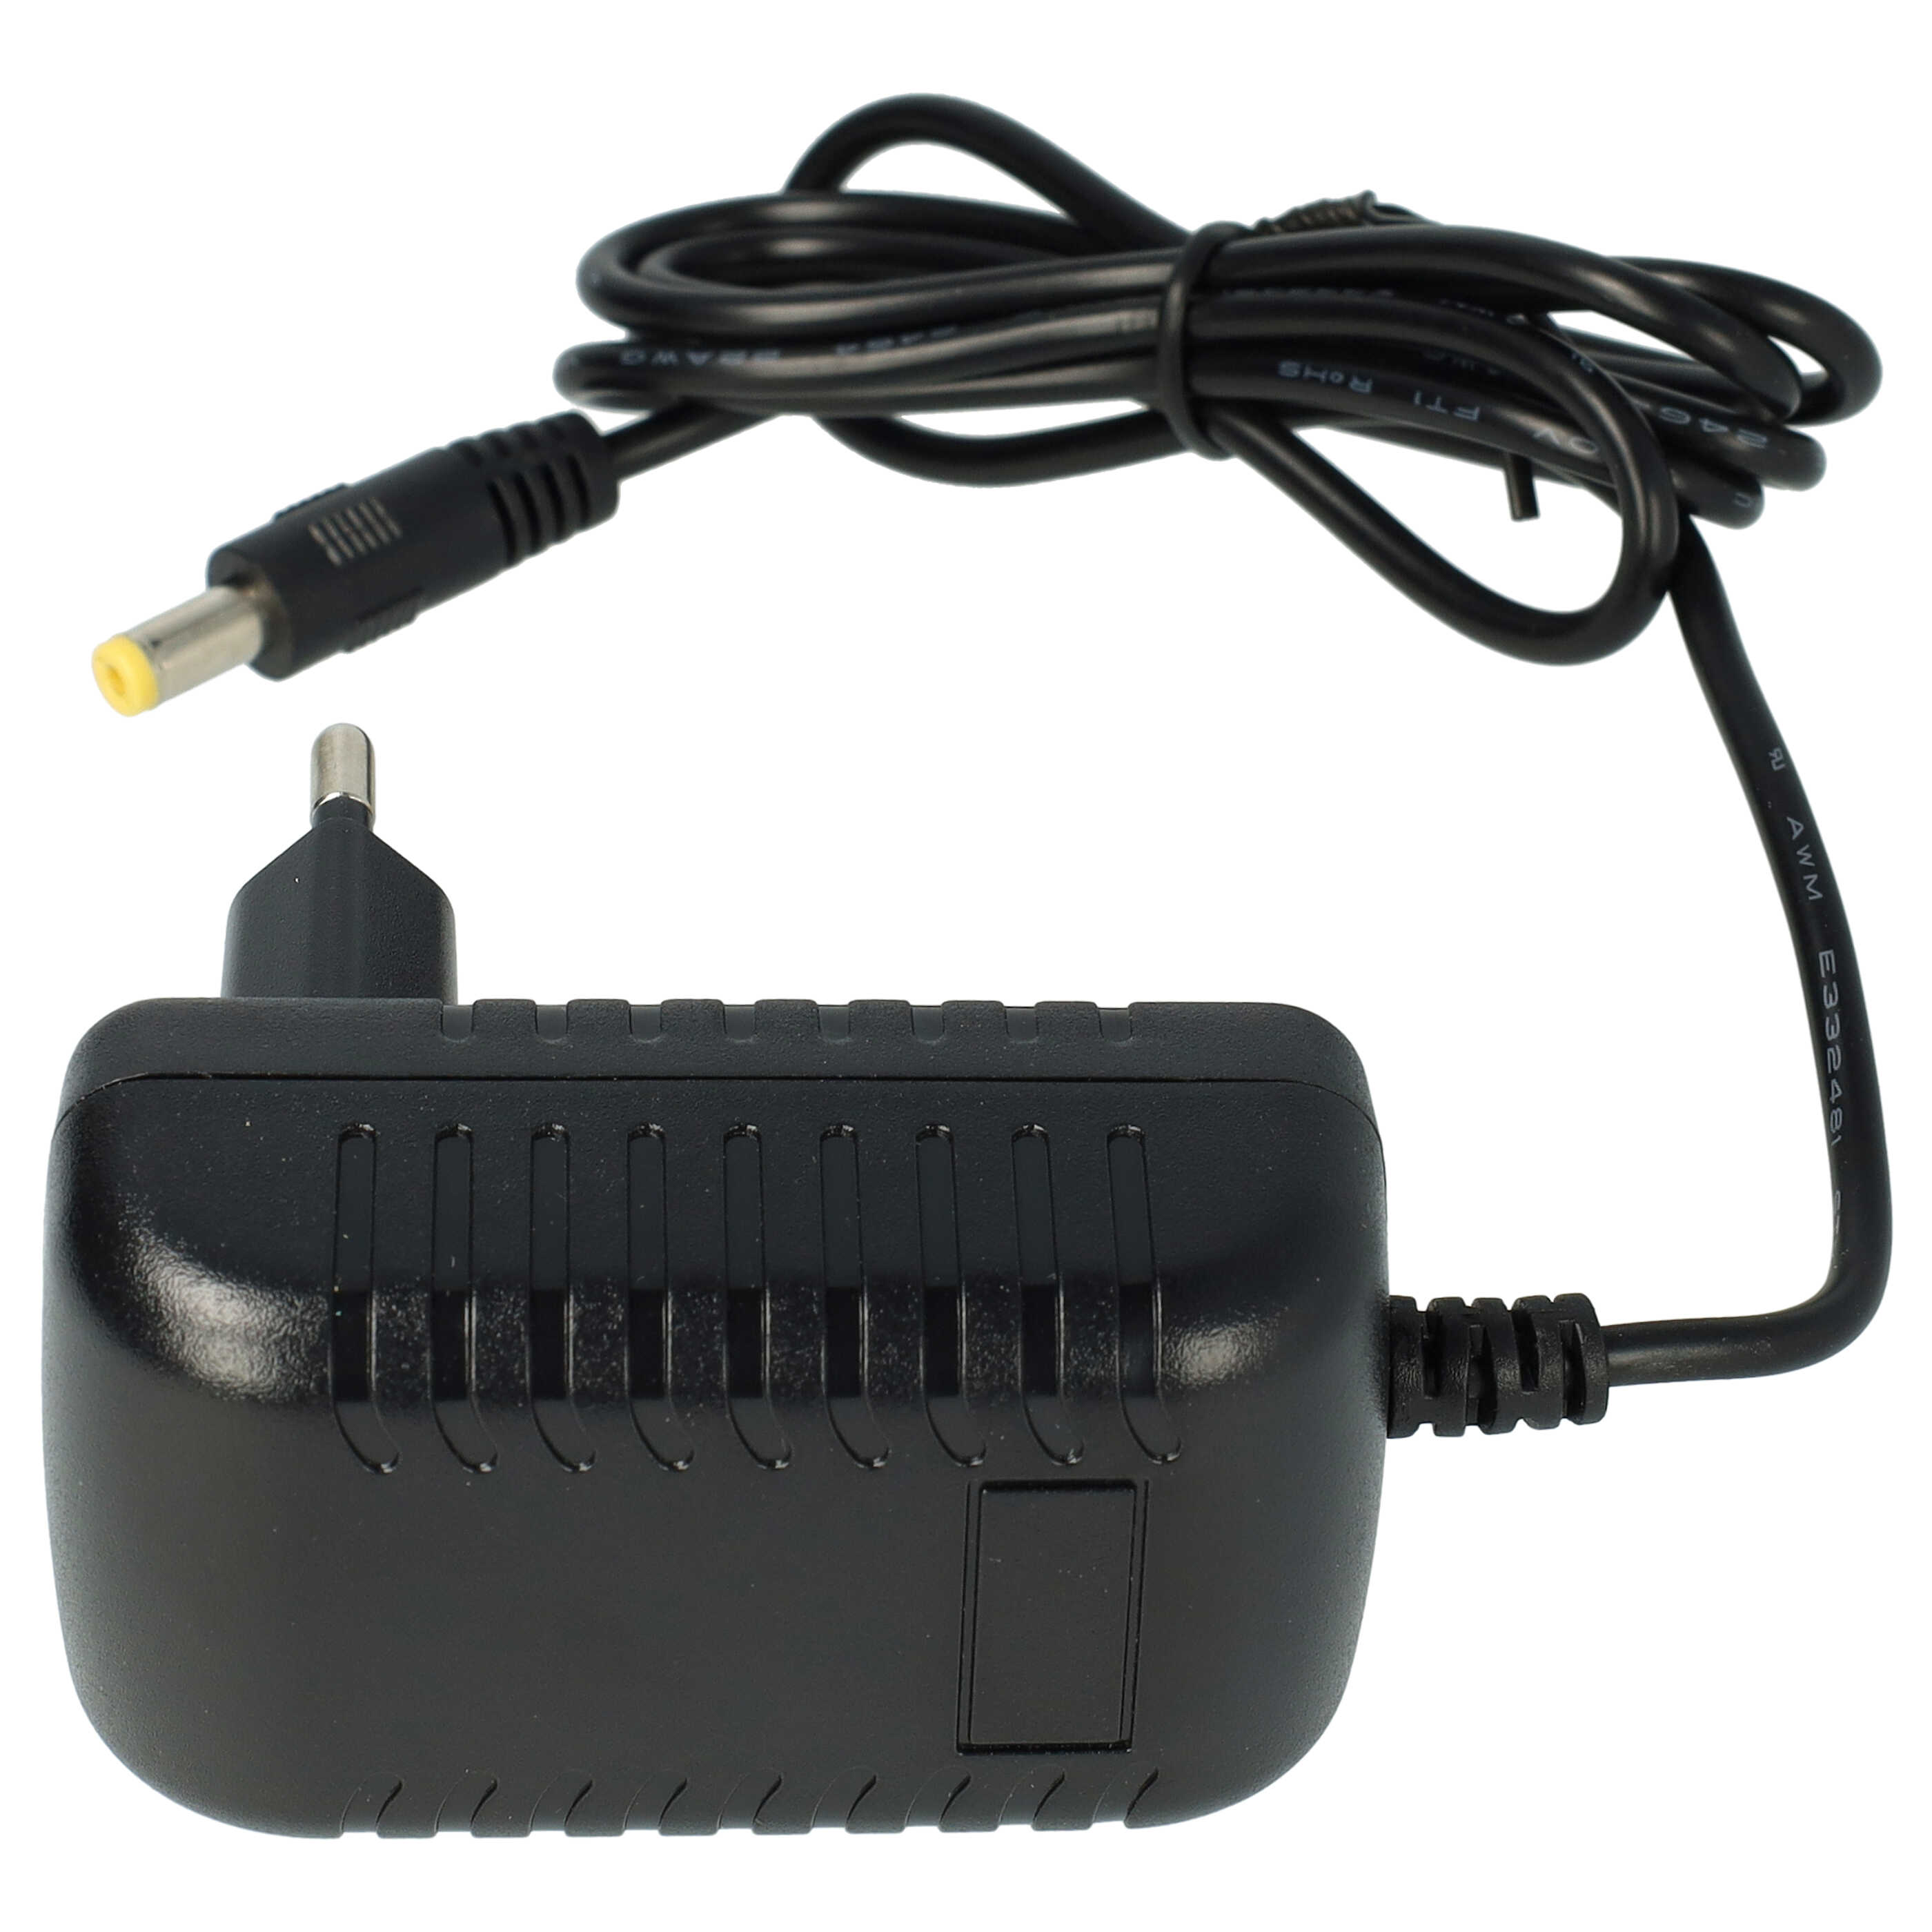 Mains Power Adapter with 5.5 x 2.1 mm Plug suitable for various Electric Devices - 5 V / 2 A